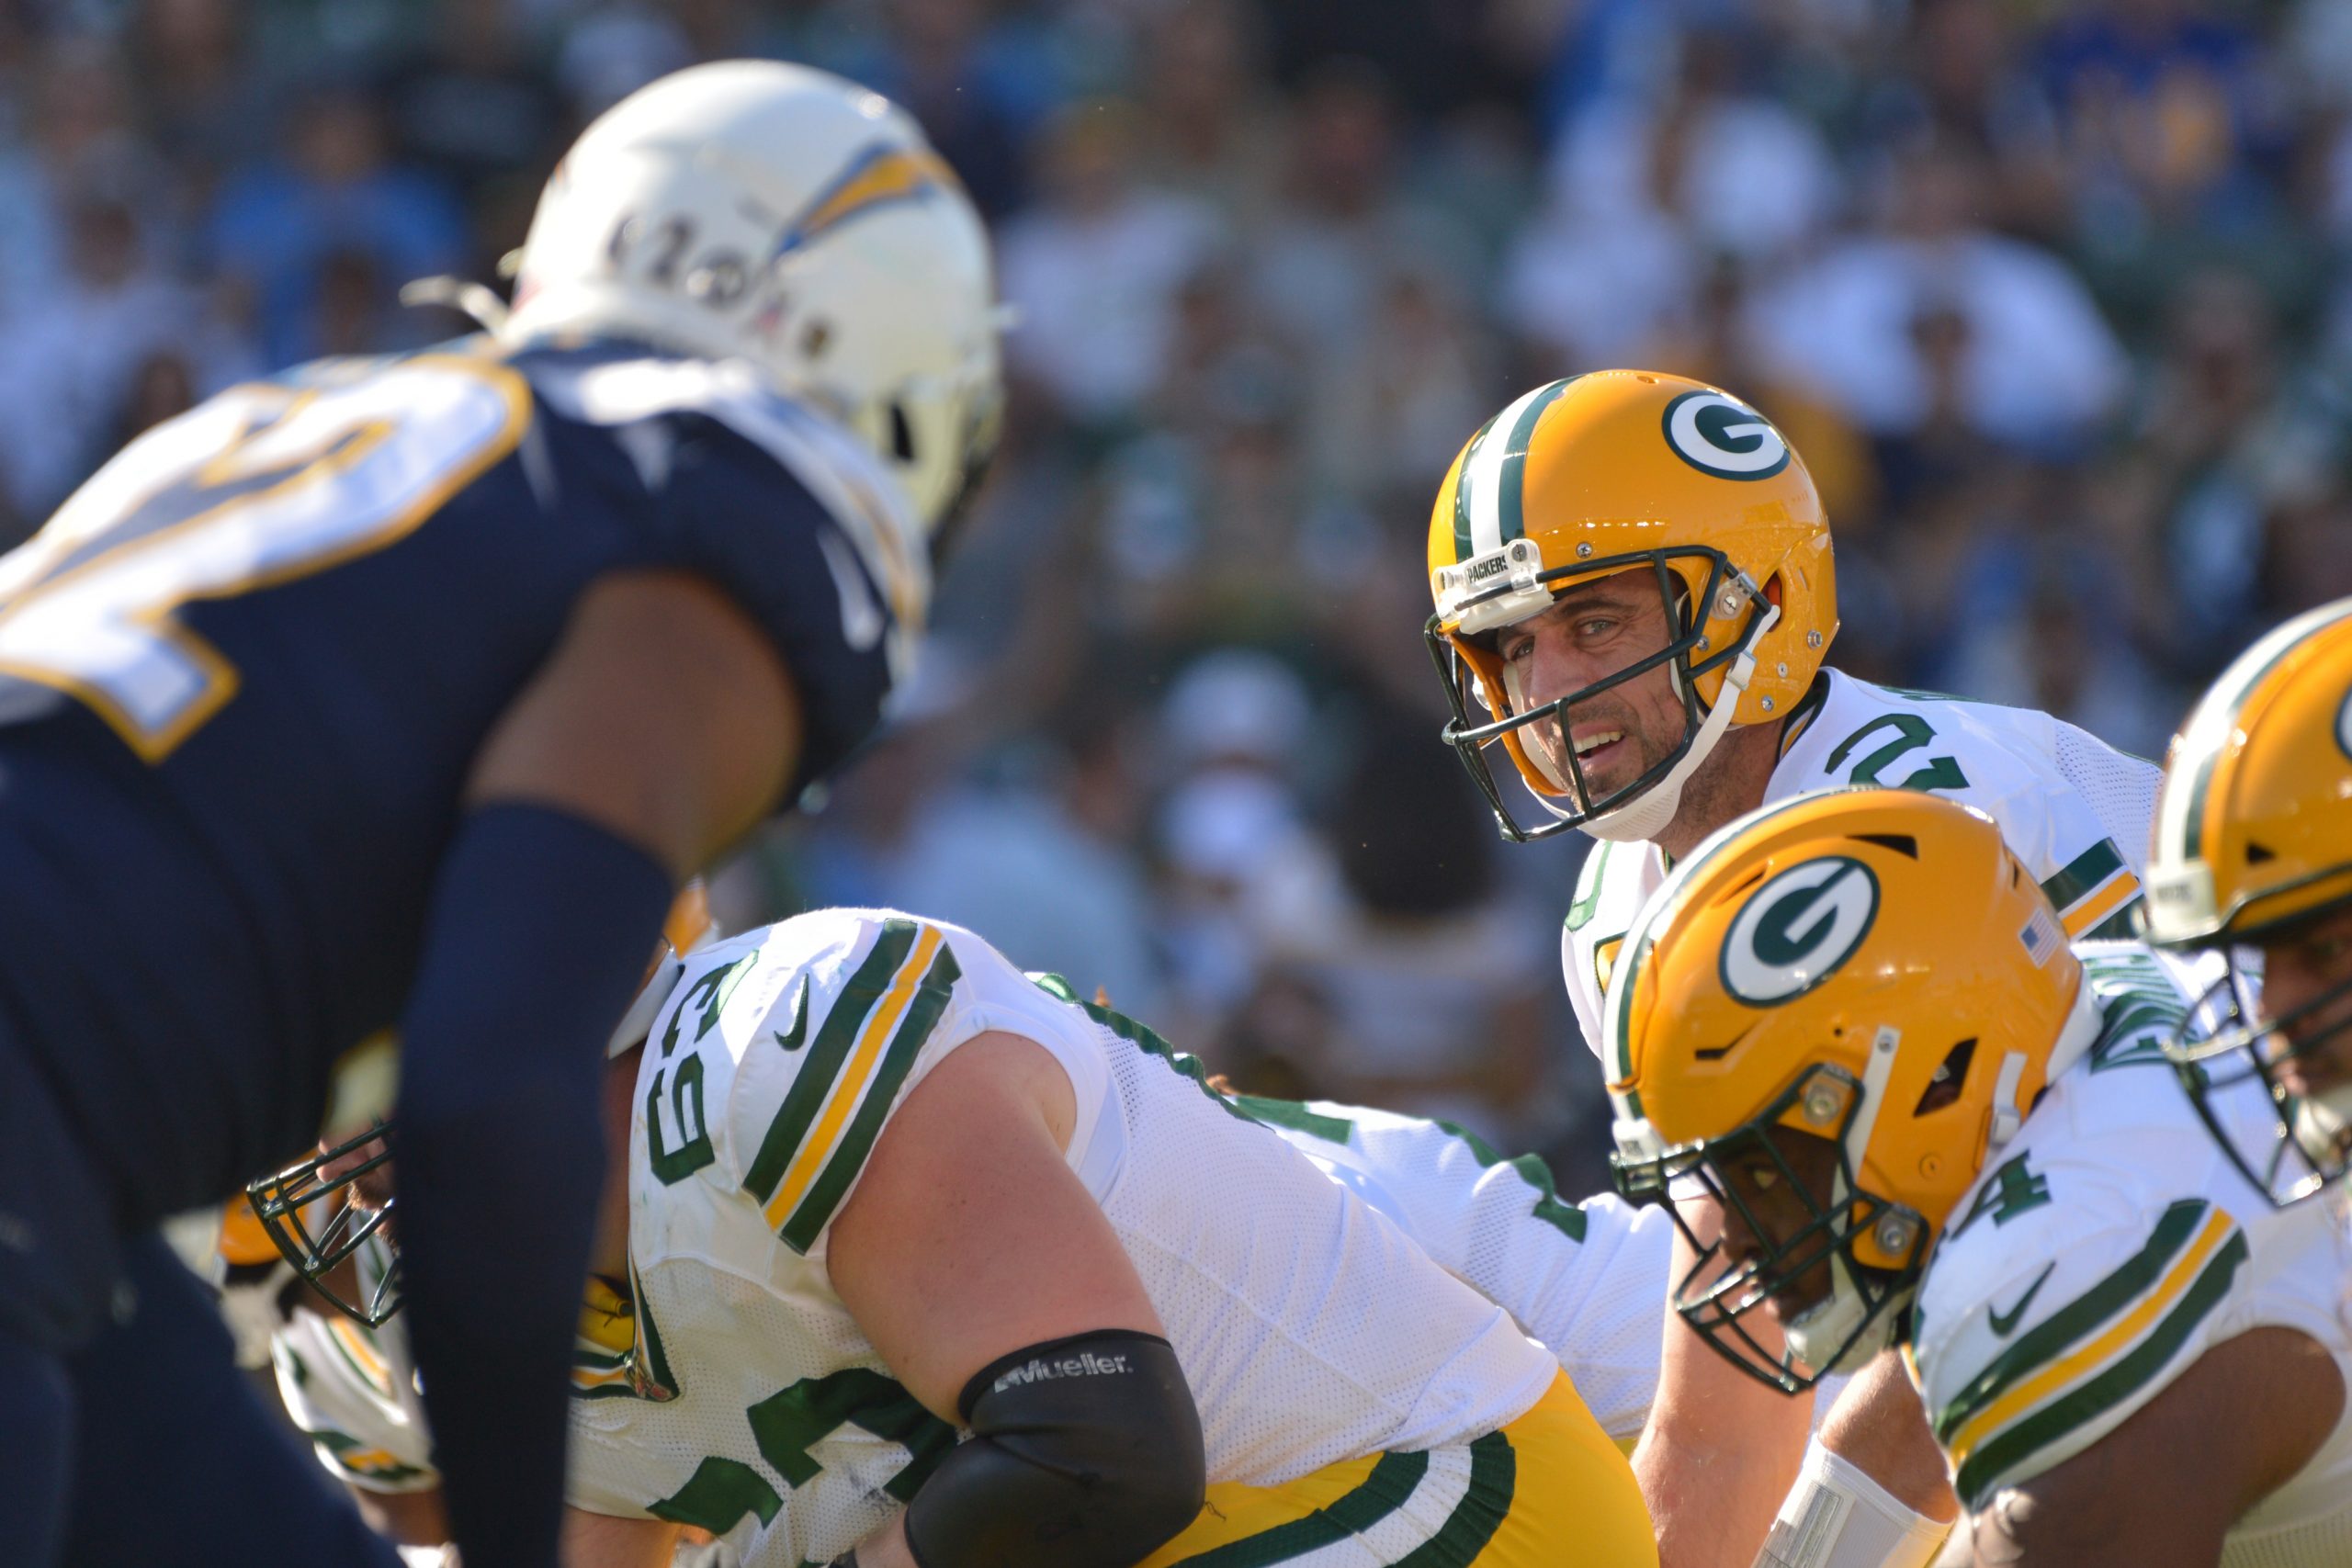 NFL: Green Bay Packers at Los Angeles Chargers